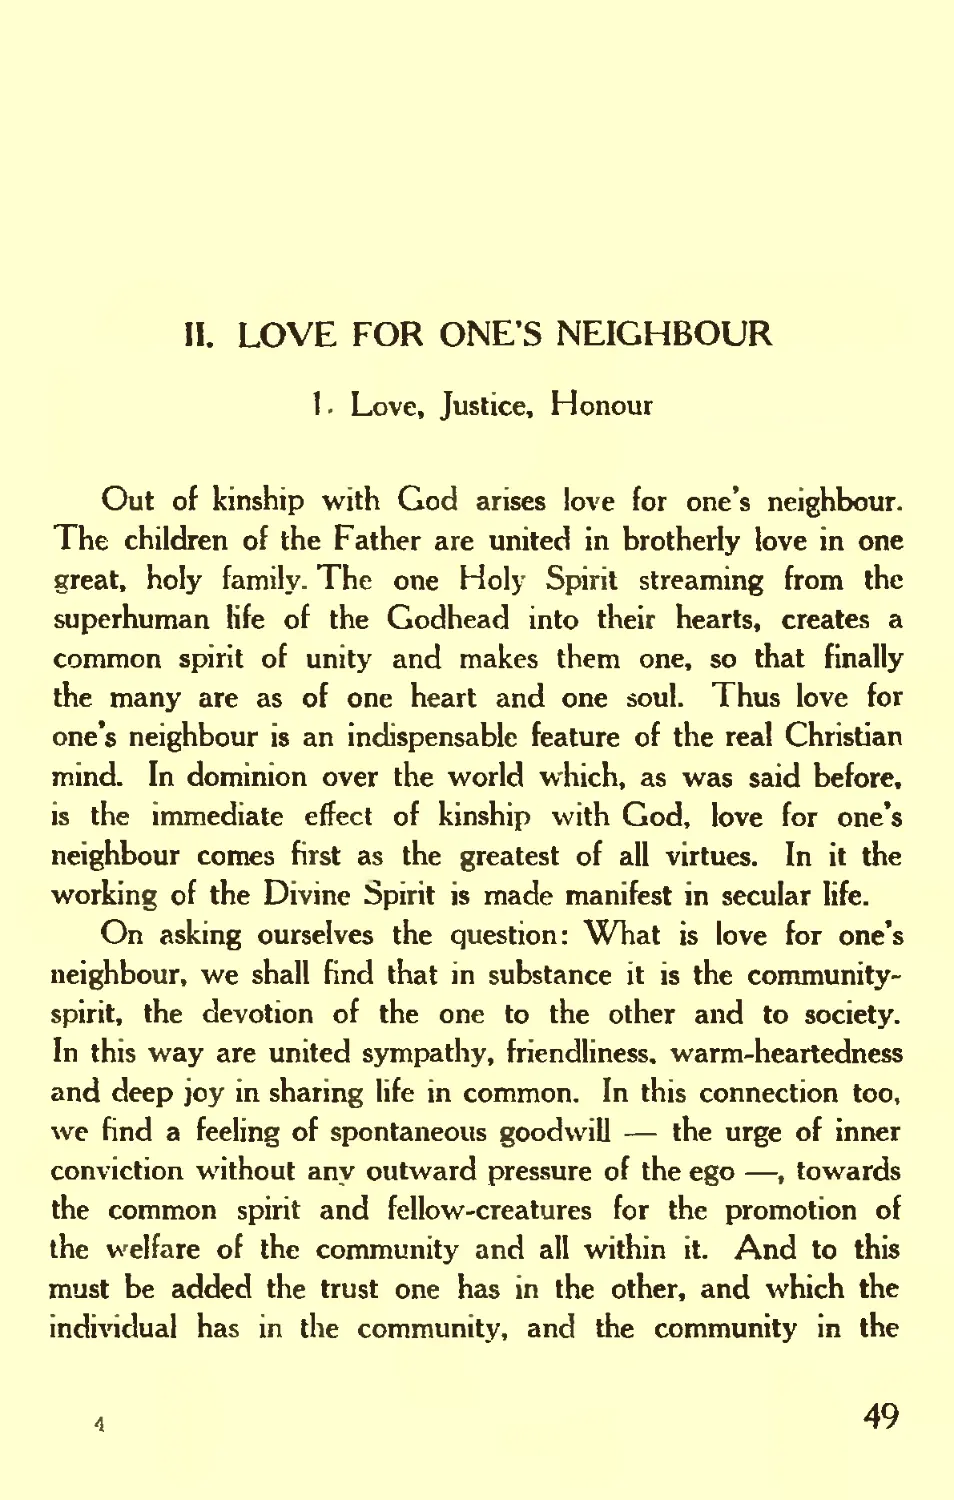 II. LOVE FOR ONE’S NEIGHBOUR
1. Love, Justice, Honour